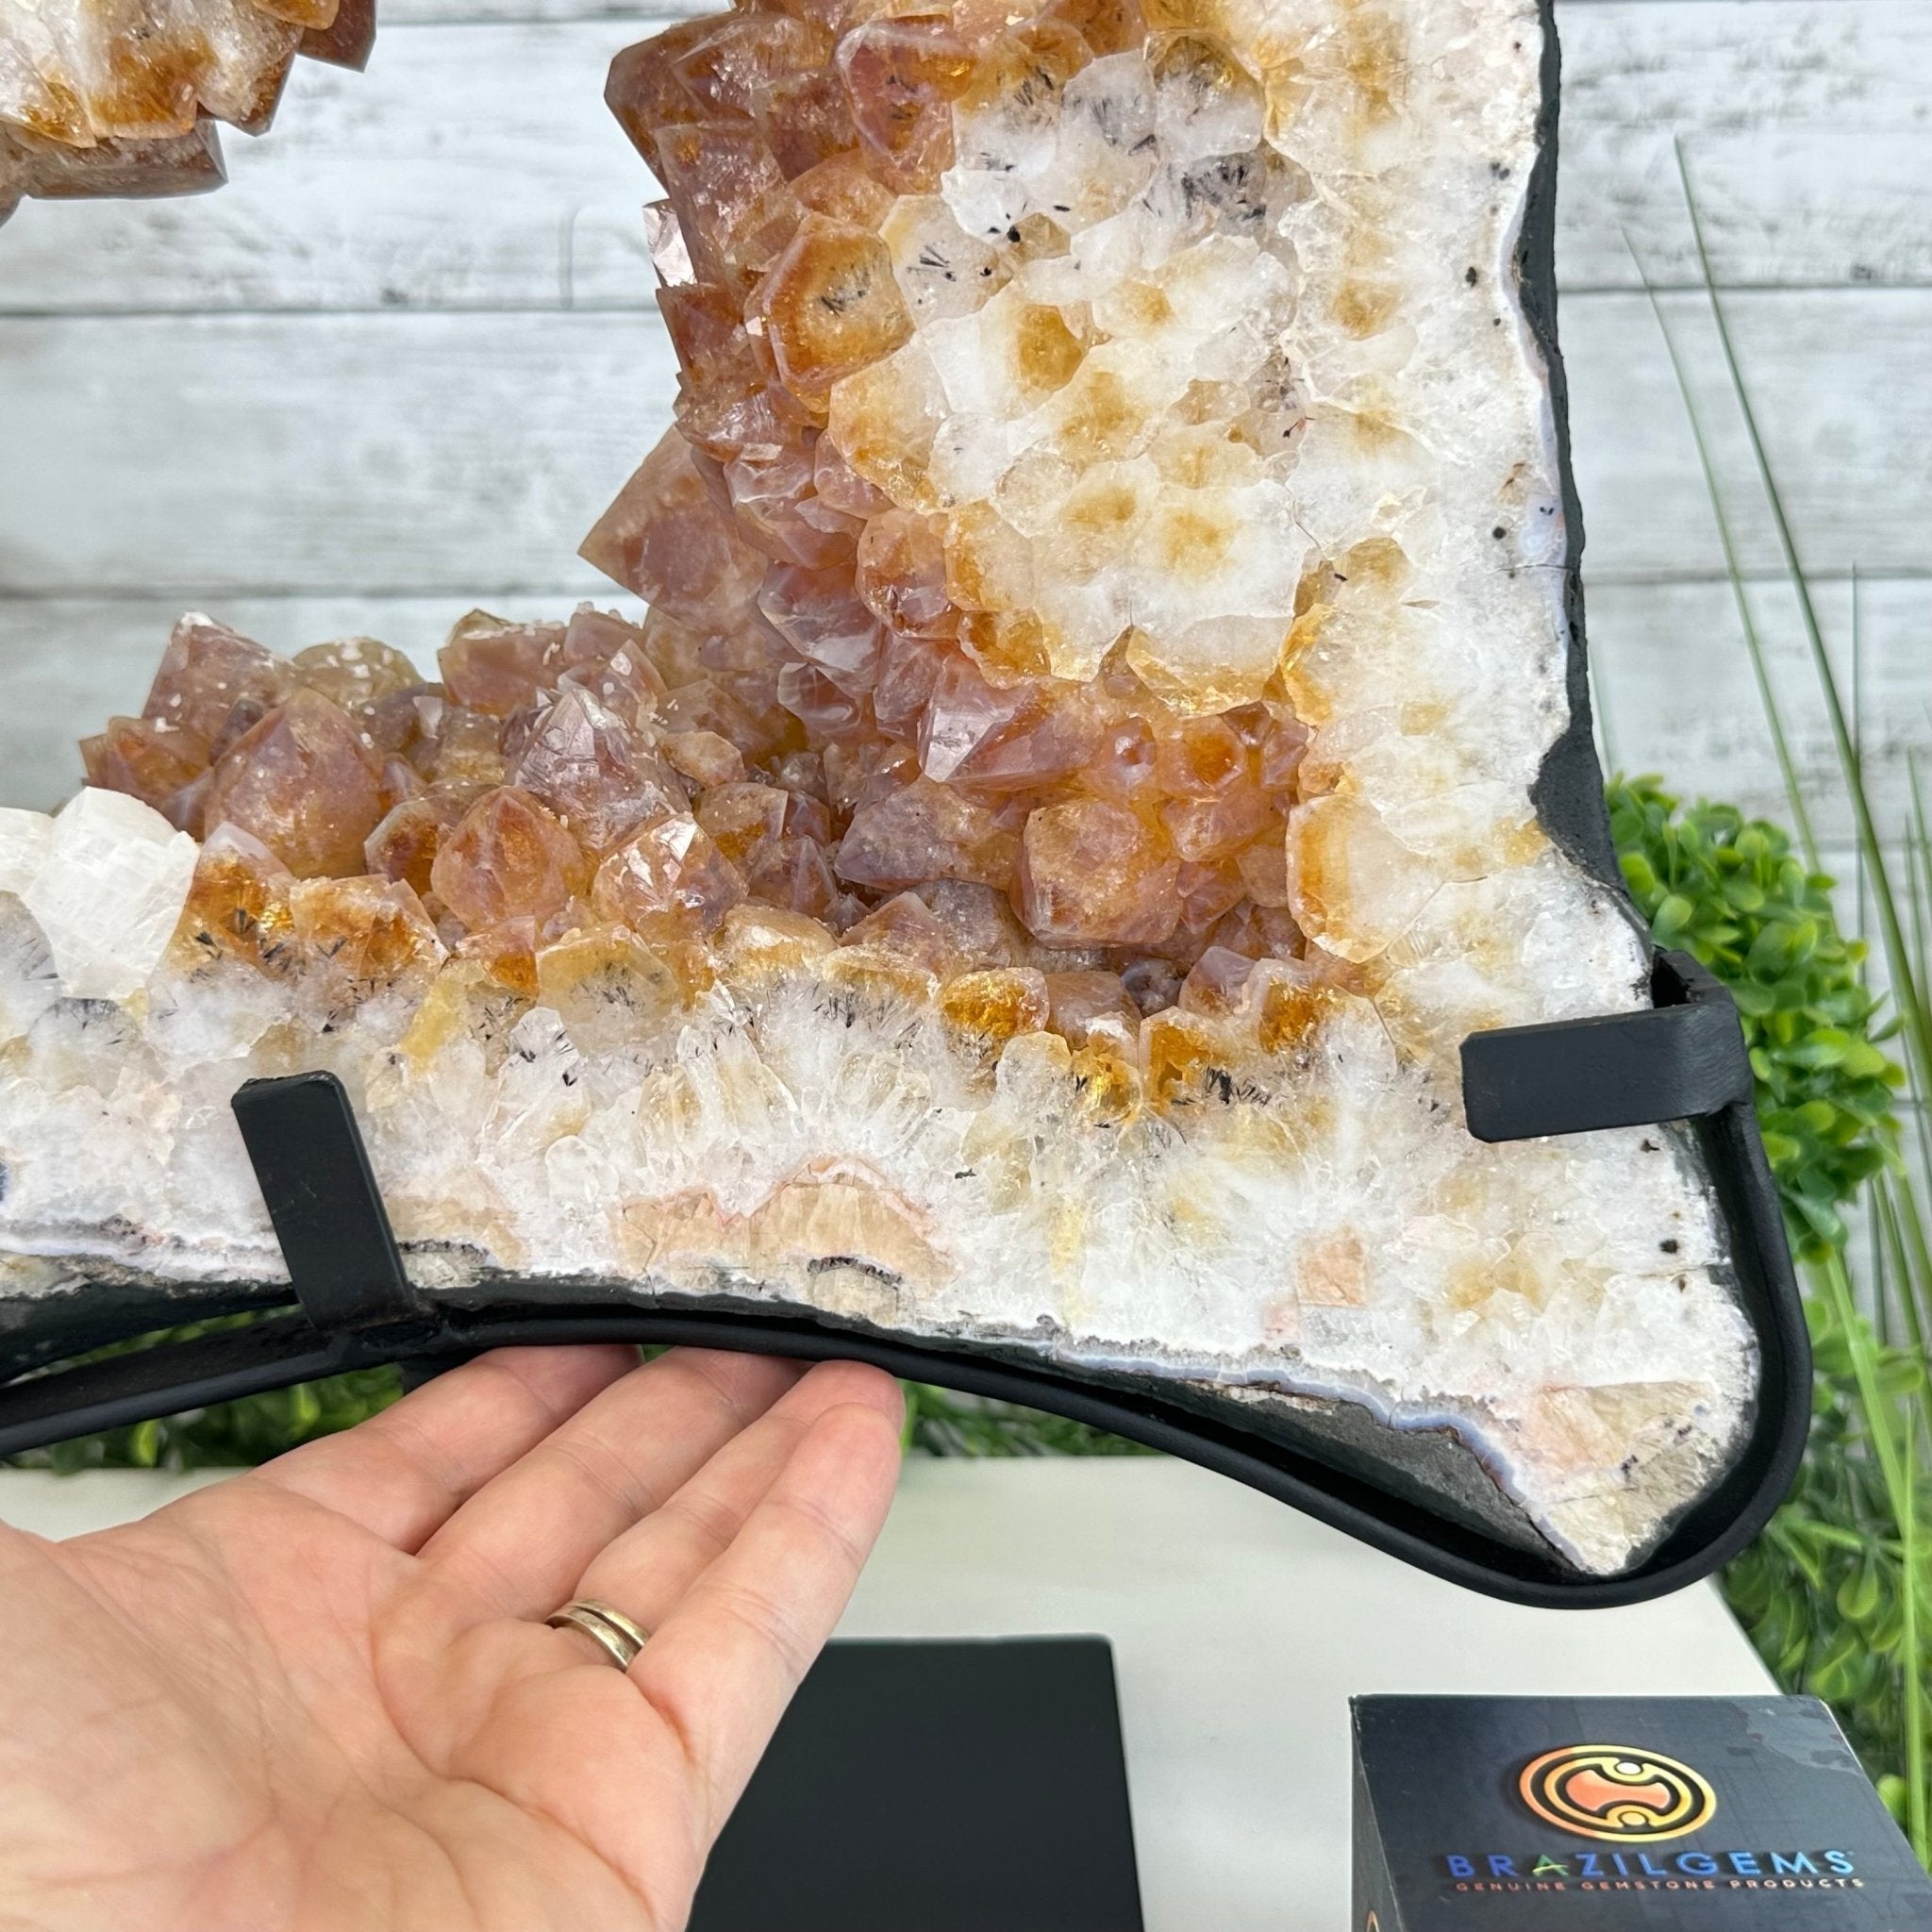 Citrine Portal on a Rotating Stand, 28.8 lbs & 18.3" tall #5625-0008 by Brazil Gems® - Brazil GemsBrazil GemsCitrine Portal on a Rotating Stand, 28.8 lbs & 18.3" tall #5625-0008 by Brazil Gems®Portals on Rotating Bases5625-0008